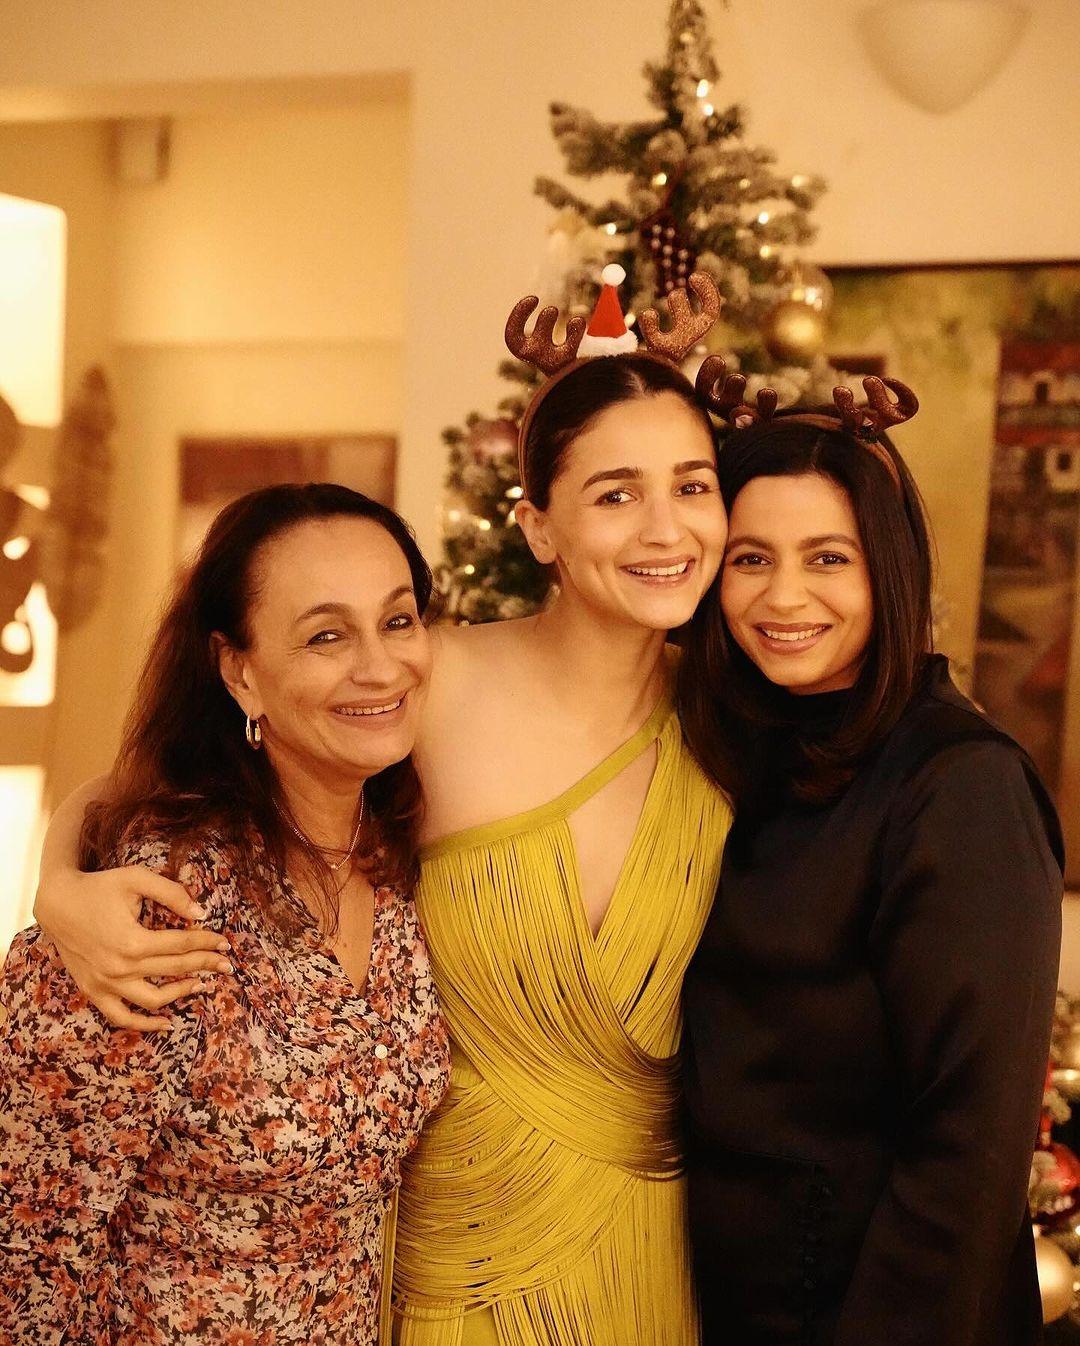 The actress shared the pictures on her gram. This pic shows her posing with mom Soni Razdaan and sister Shaheen Bhatt